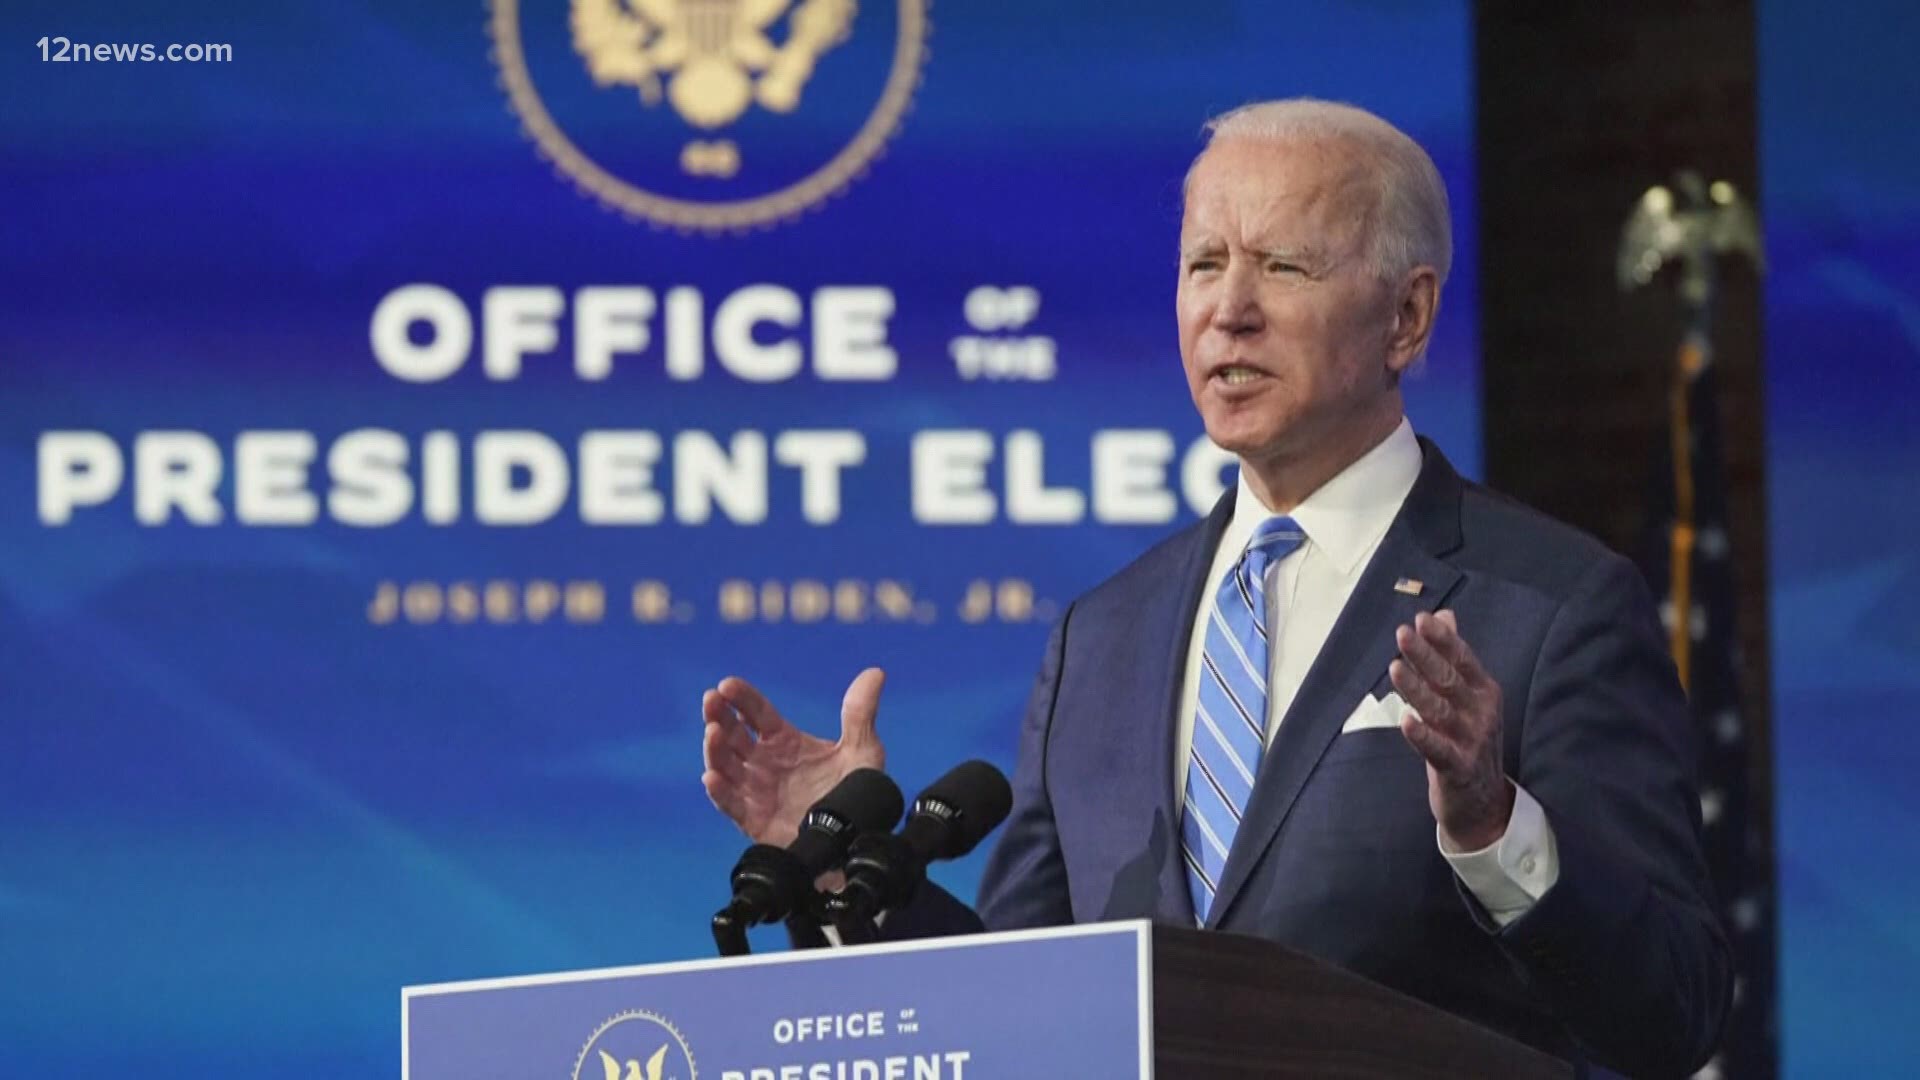 President Biden called gun violence a public health crisis and an international embarrassment before announcing actions that don't need Congressional approval.